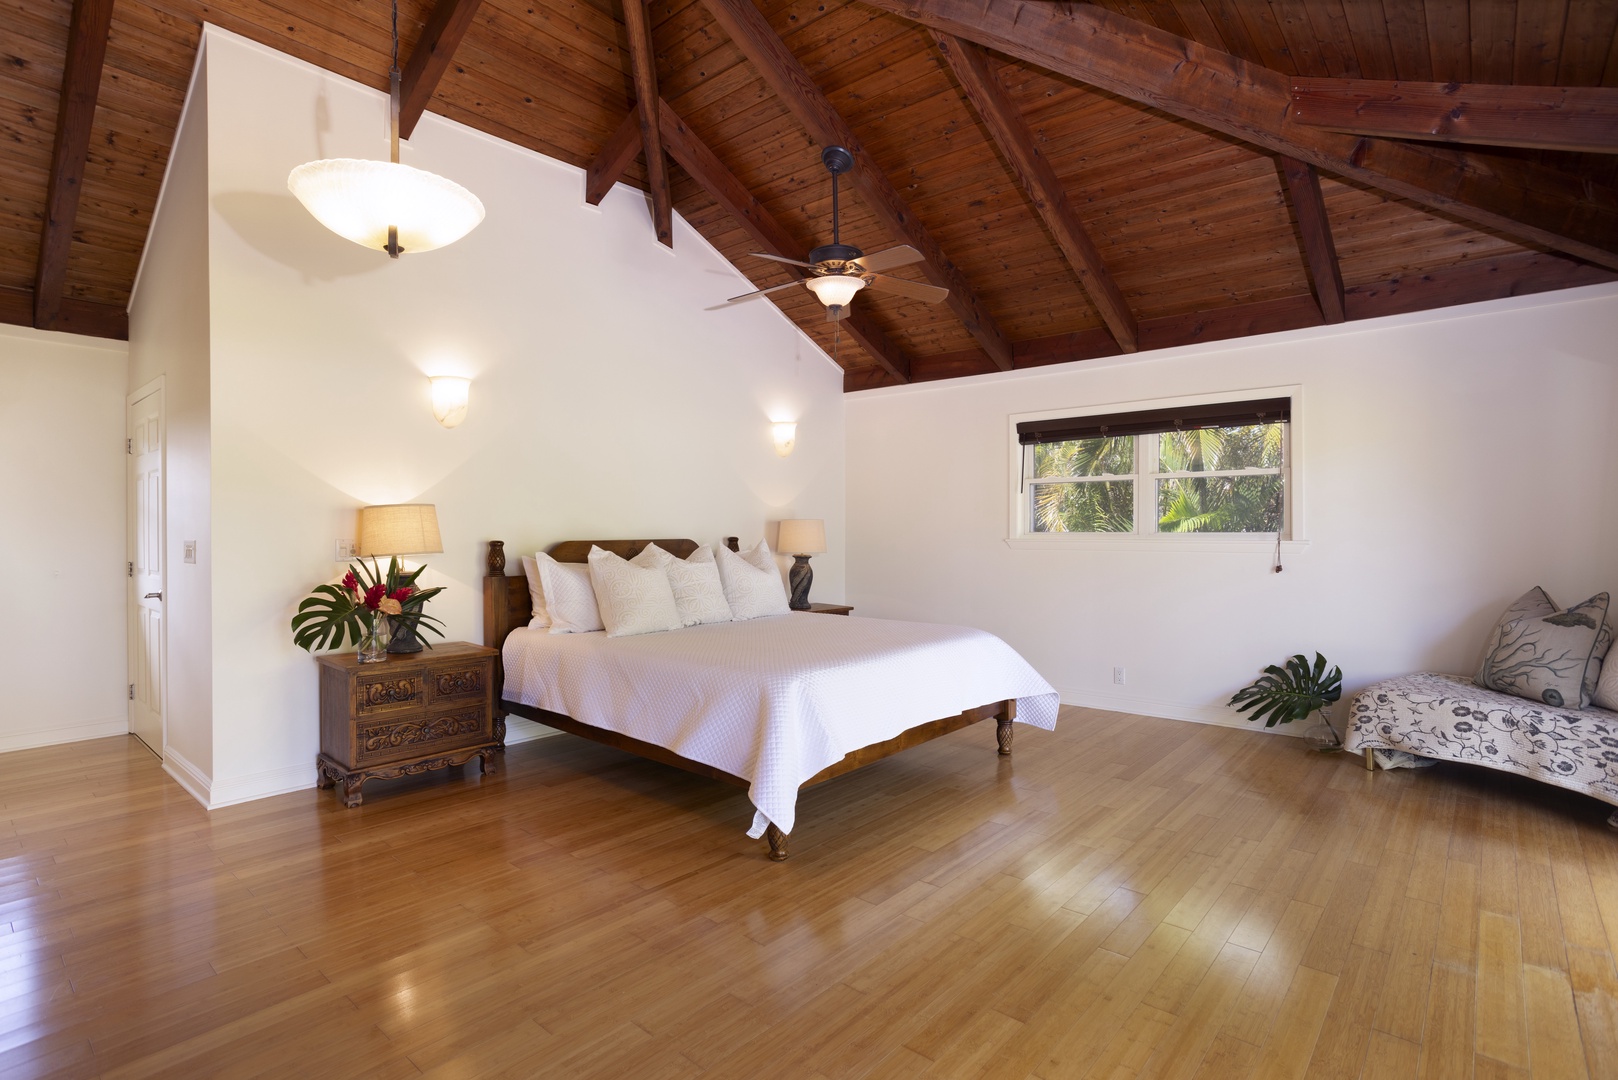 Kailua Vacation Rentals, Mokulua Seaside - Spacious and airy primary guest suite with a Cal King bed and lofted ceilings